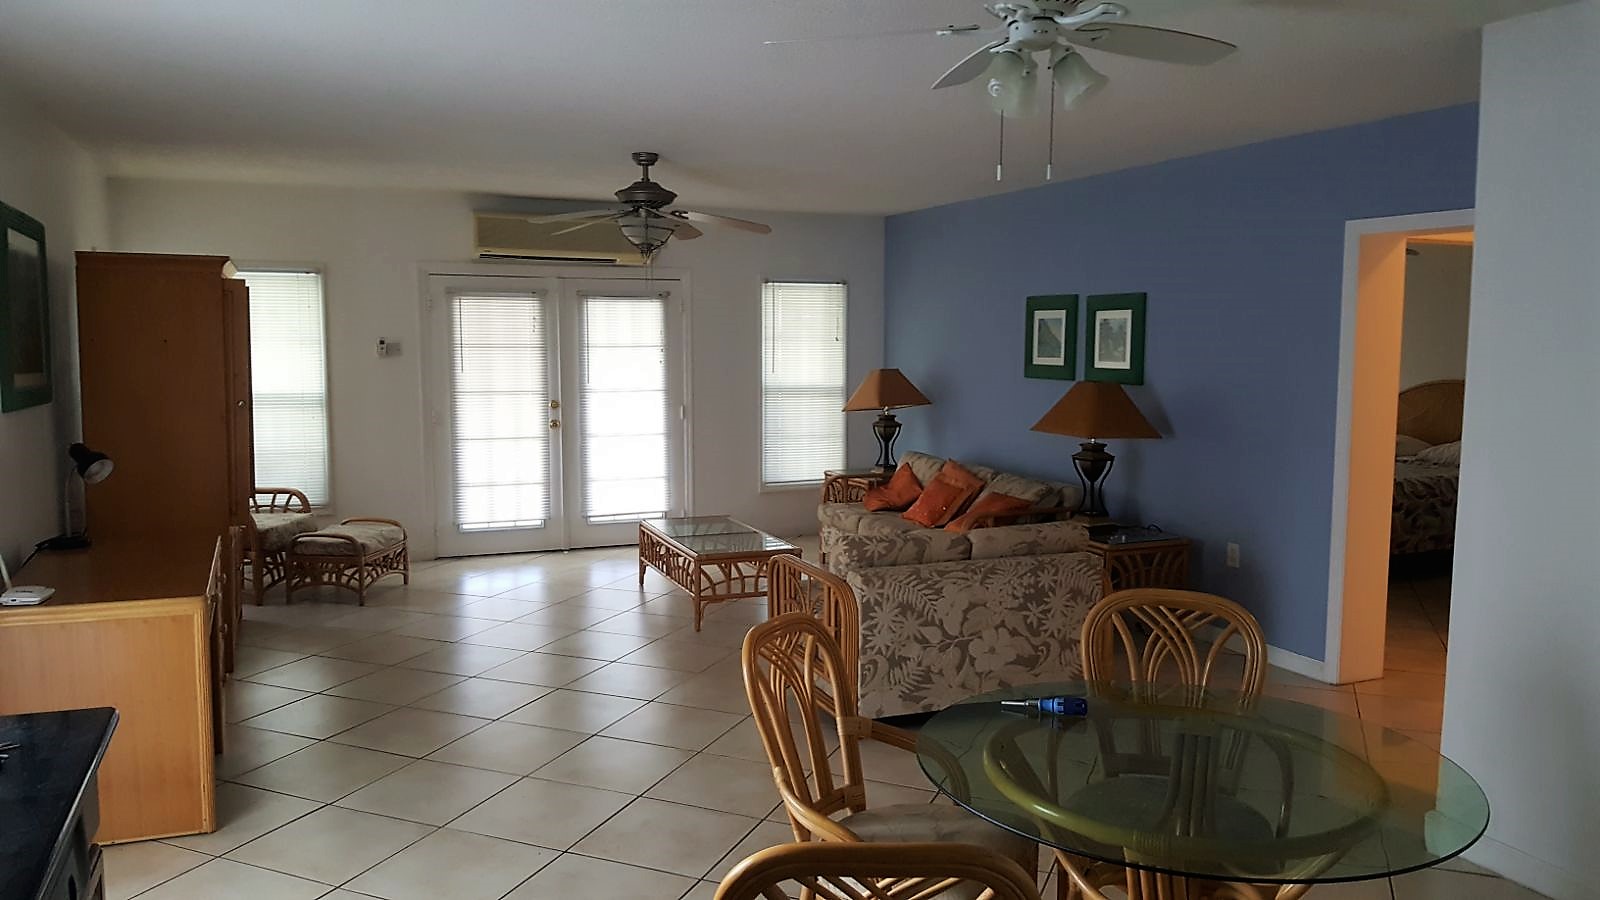 St. Christopher Club 2 Bed - 1 Bath Condo for Rent